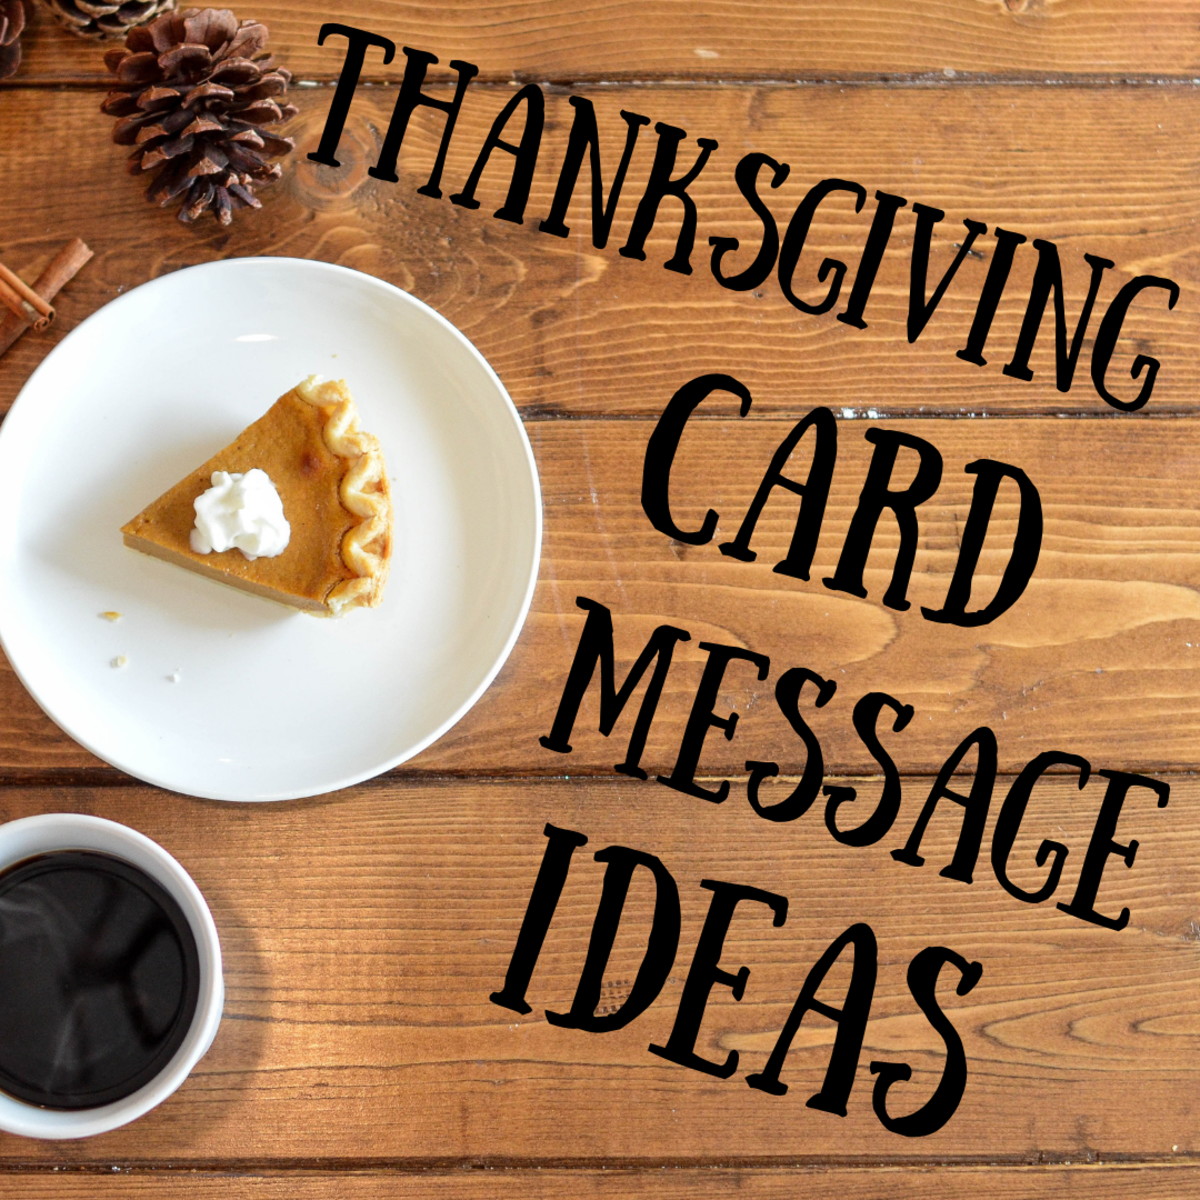 30+ Ideas for Thanksgiving Messages to Write in a Card